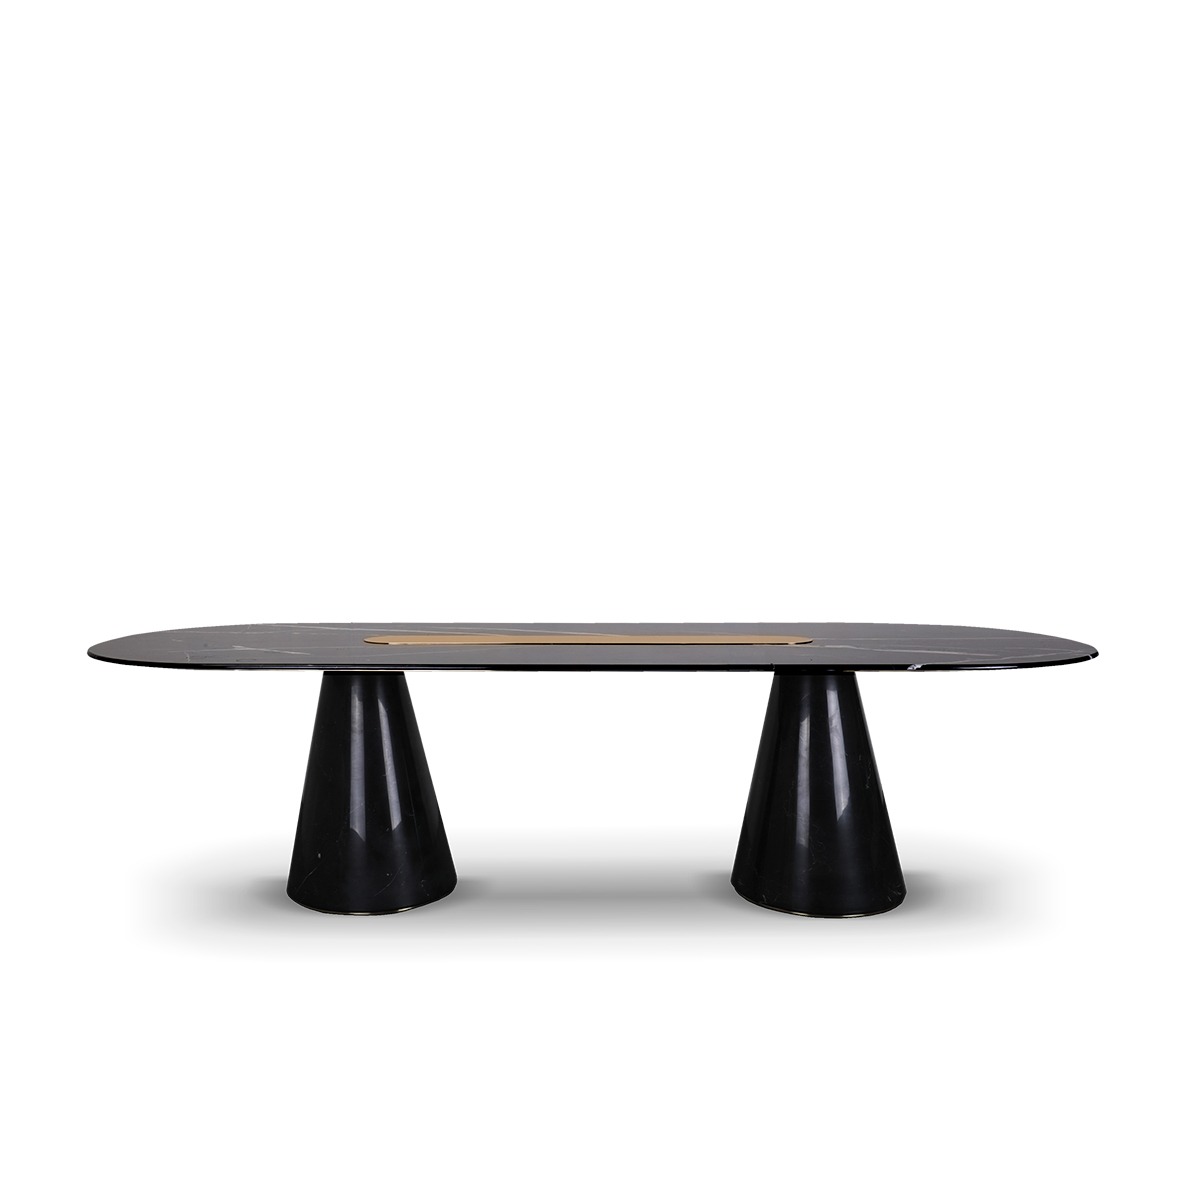 EH bertoia oval table 01 ESSENTIAL HOME